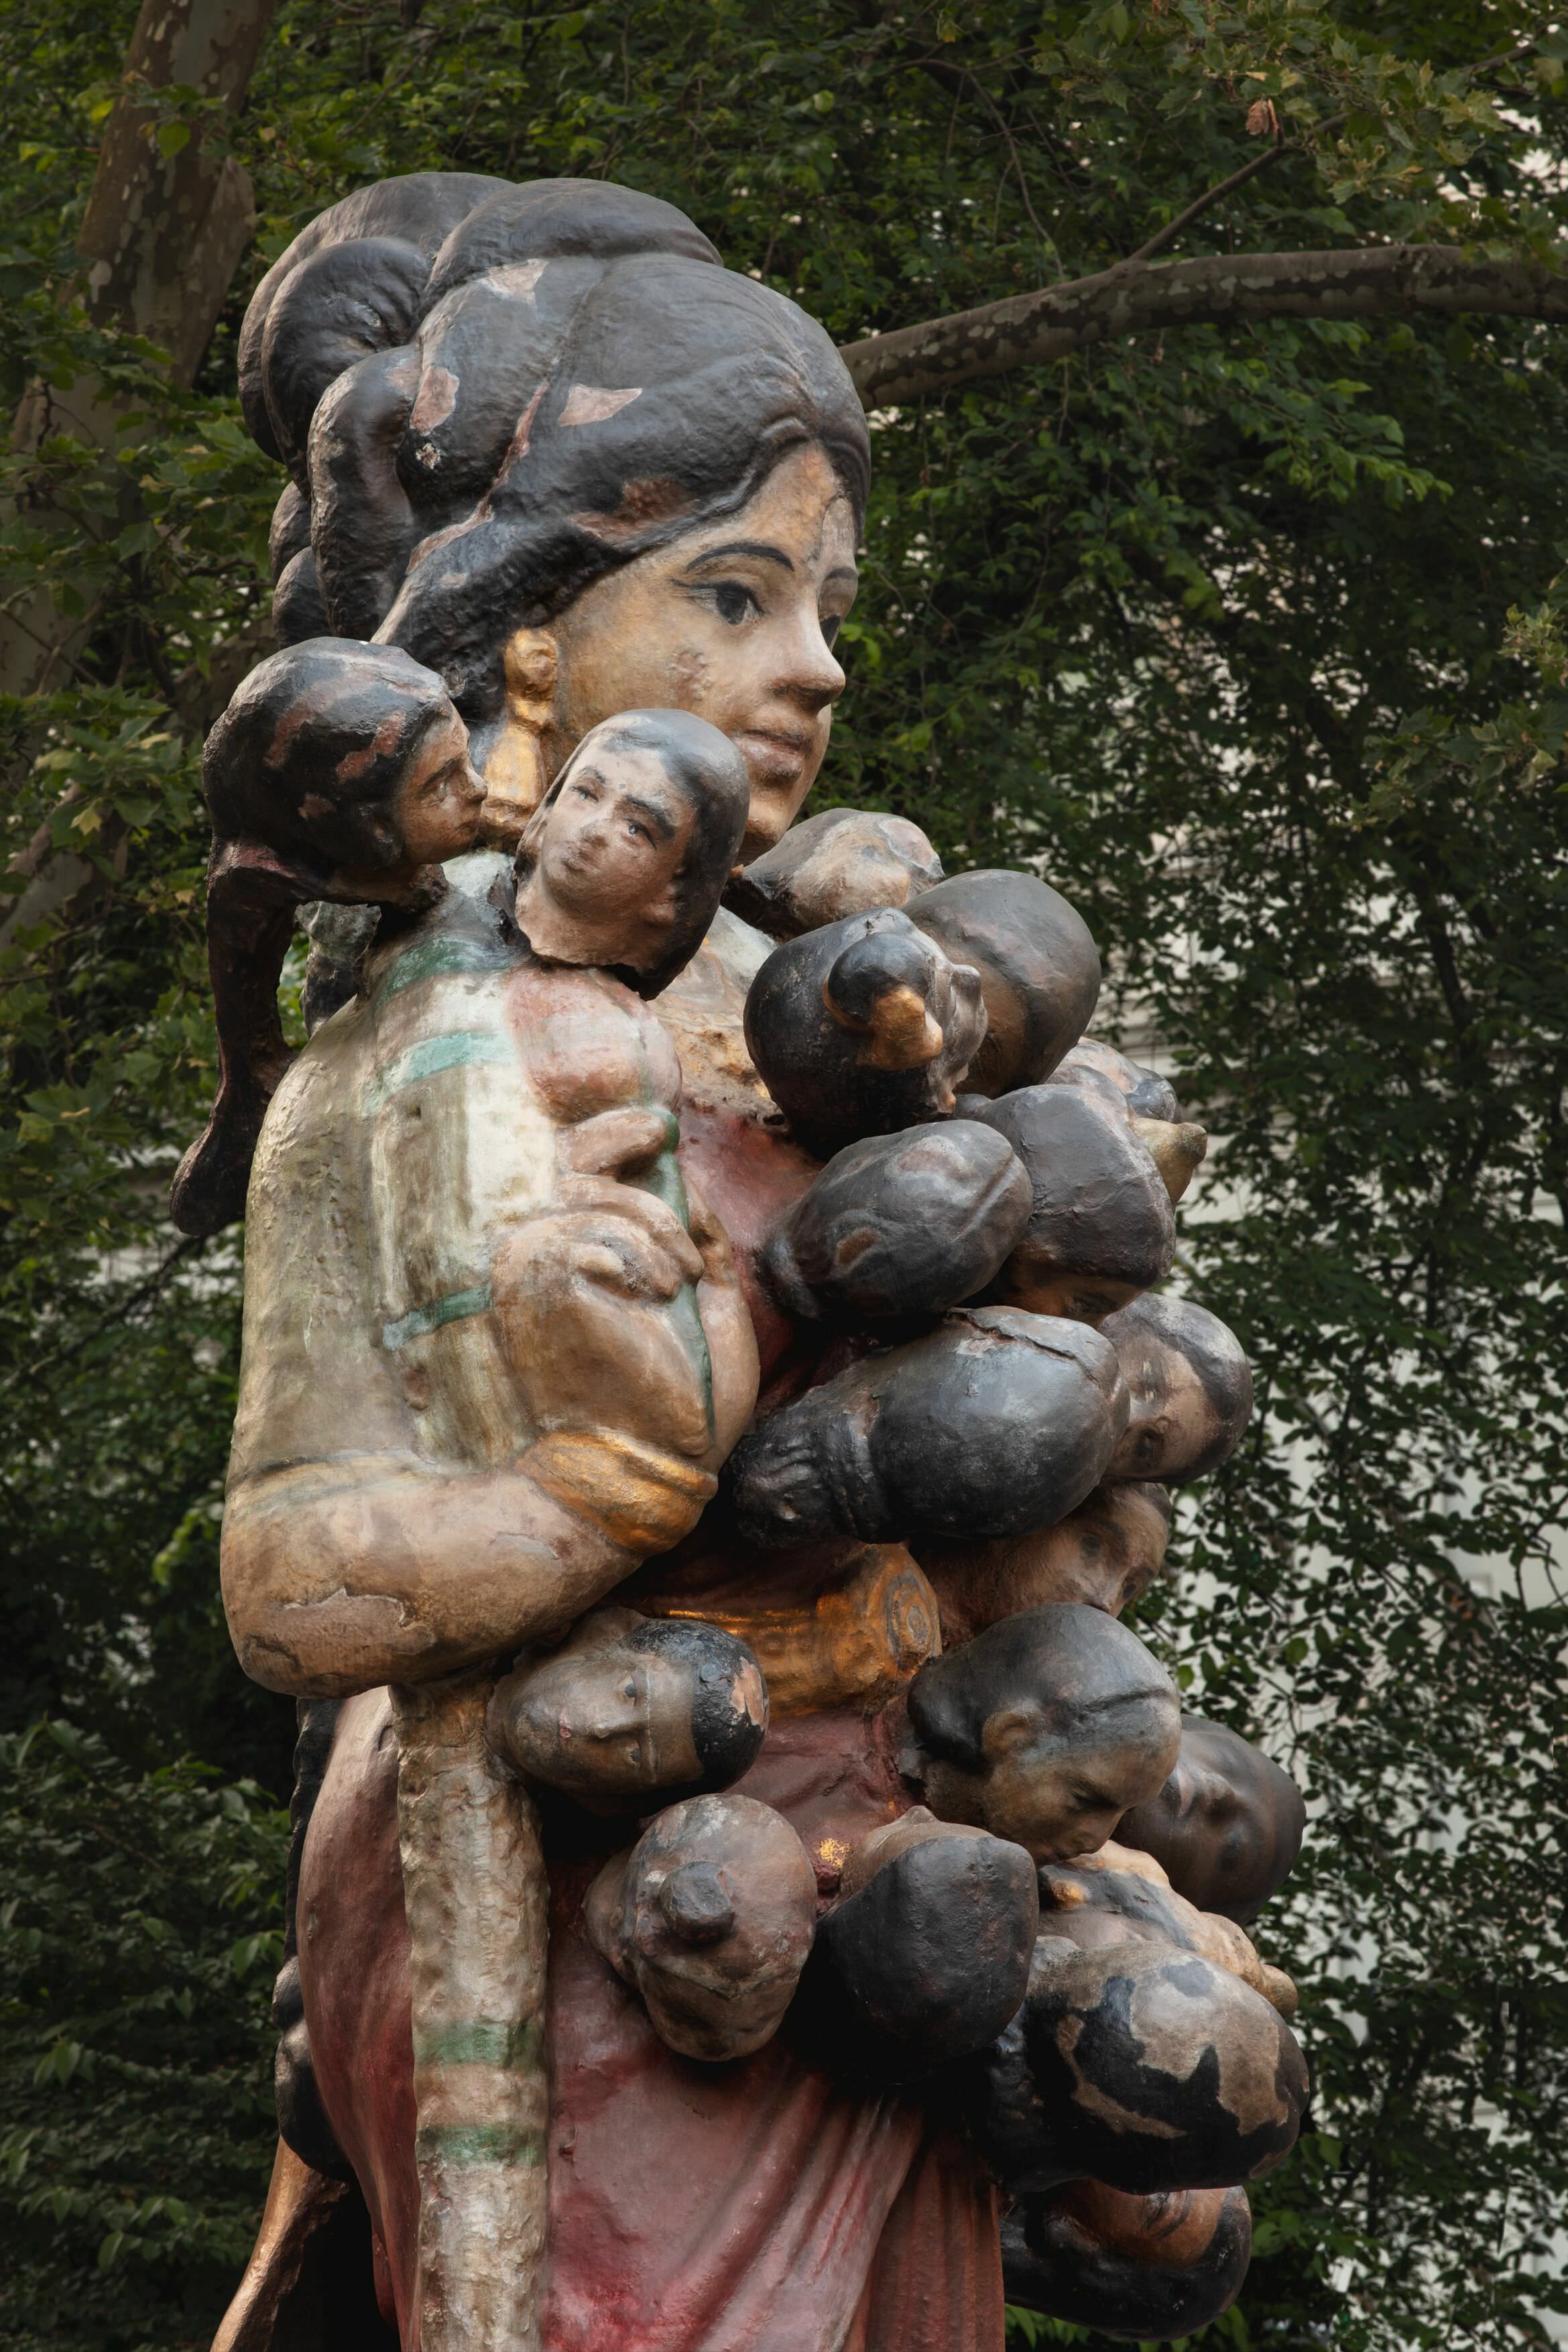 A sculpture of a woman, covered in a chain of heads.